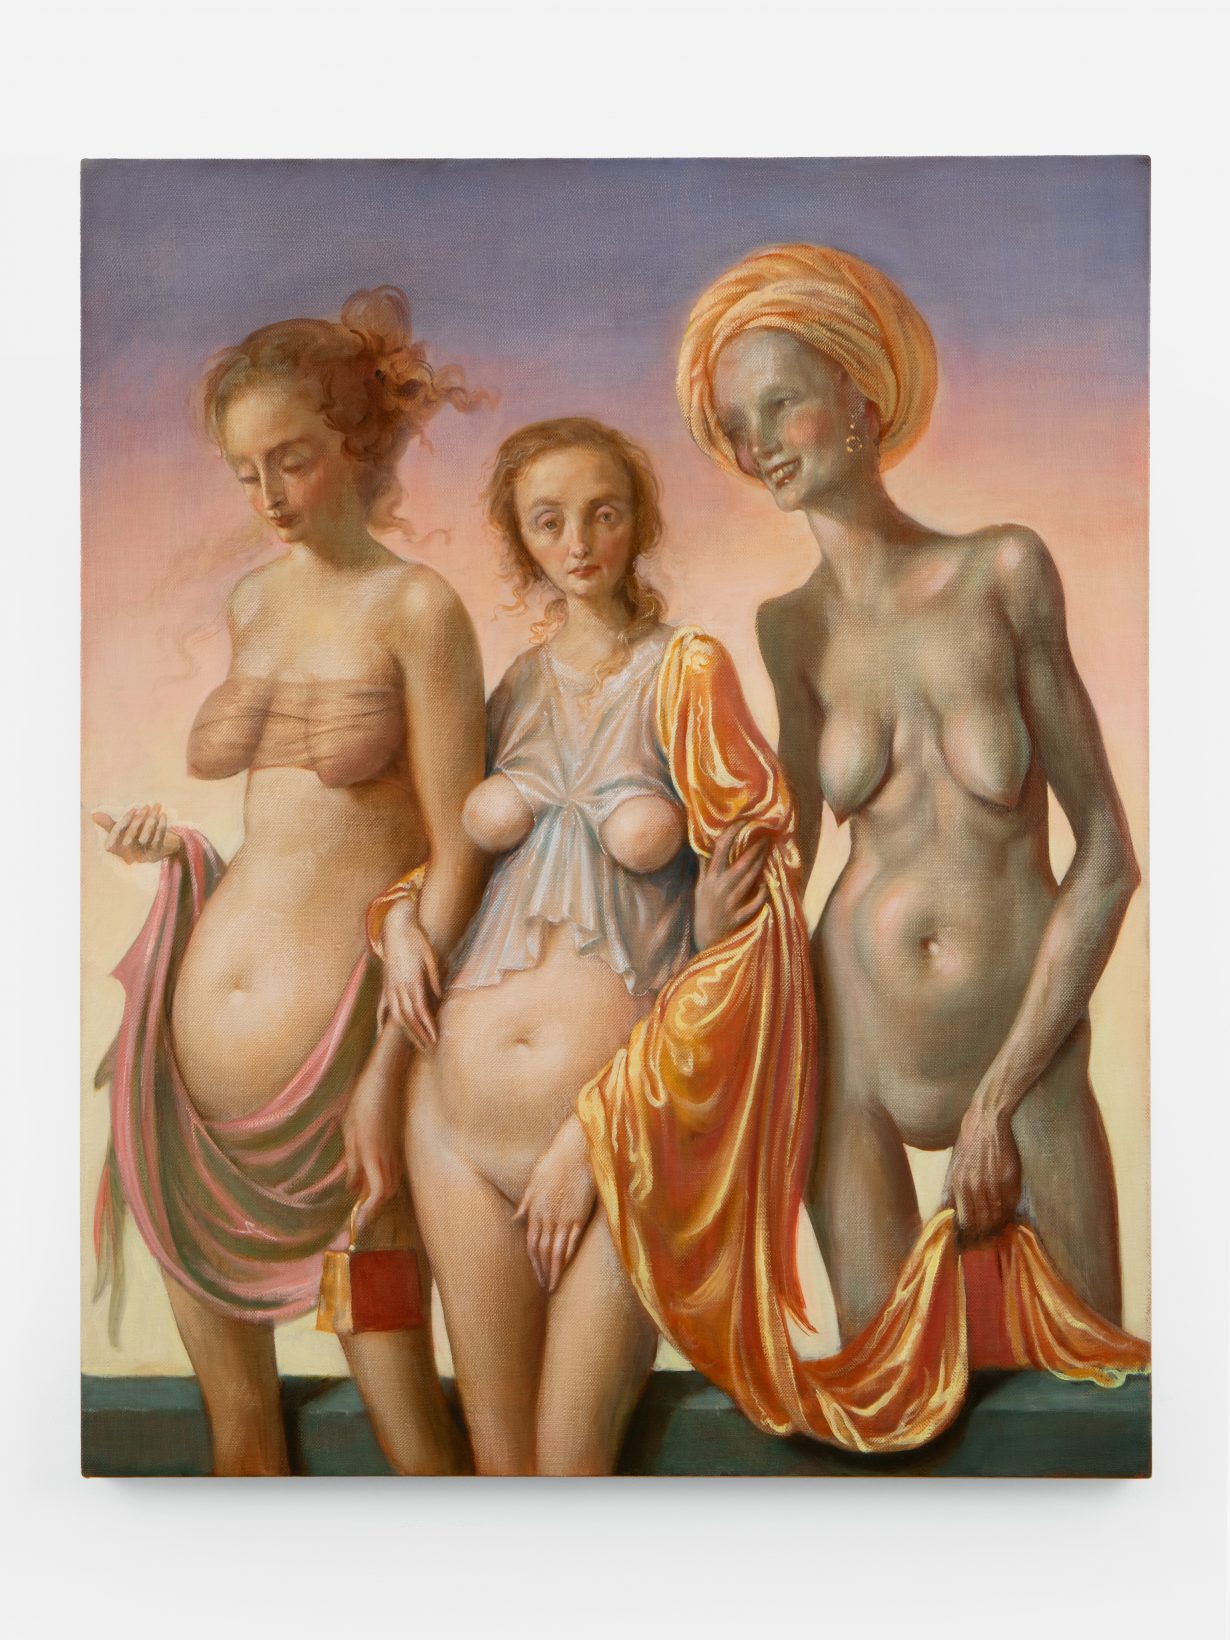 Nadigai Simran Sex Video - John Currin's Paintings Are Disgusting and Amoral. That's Why They're So  Good - ArtReview